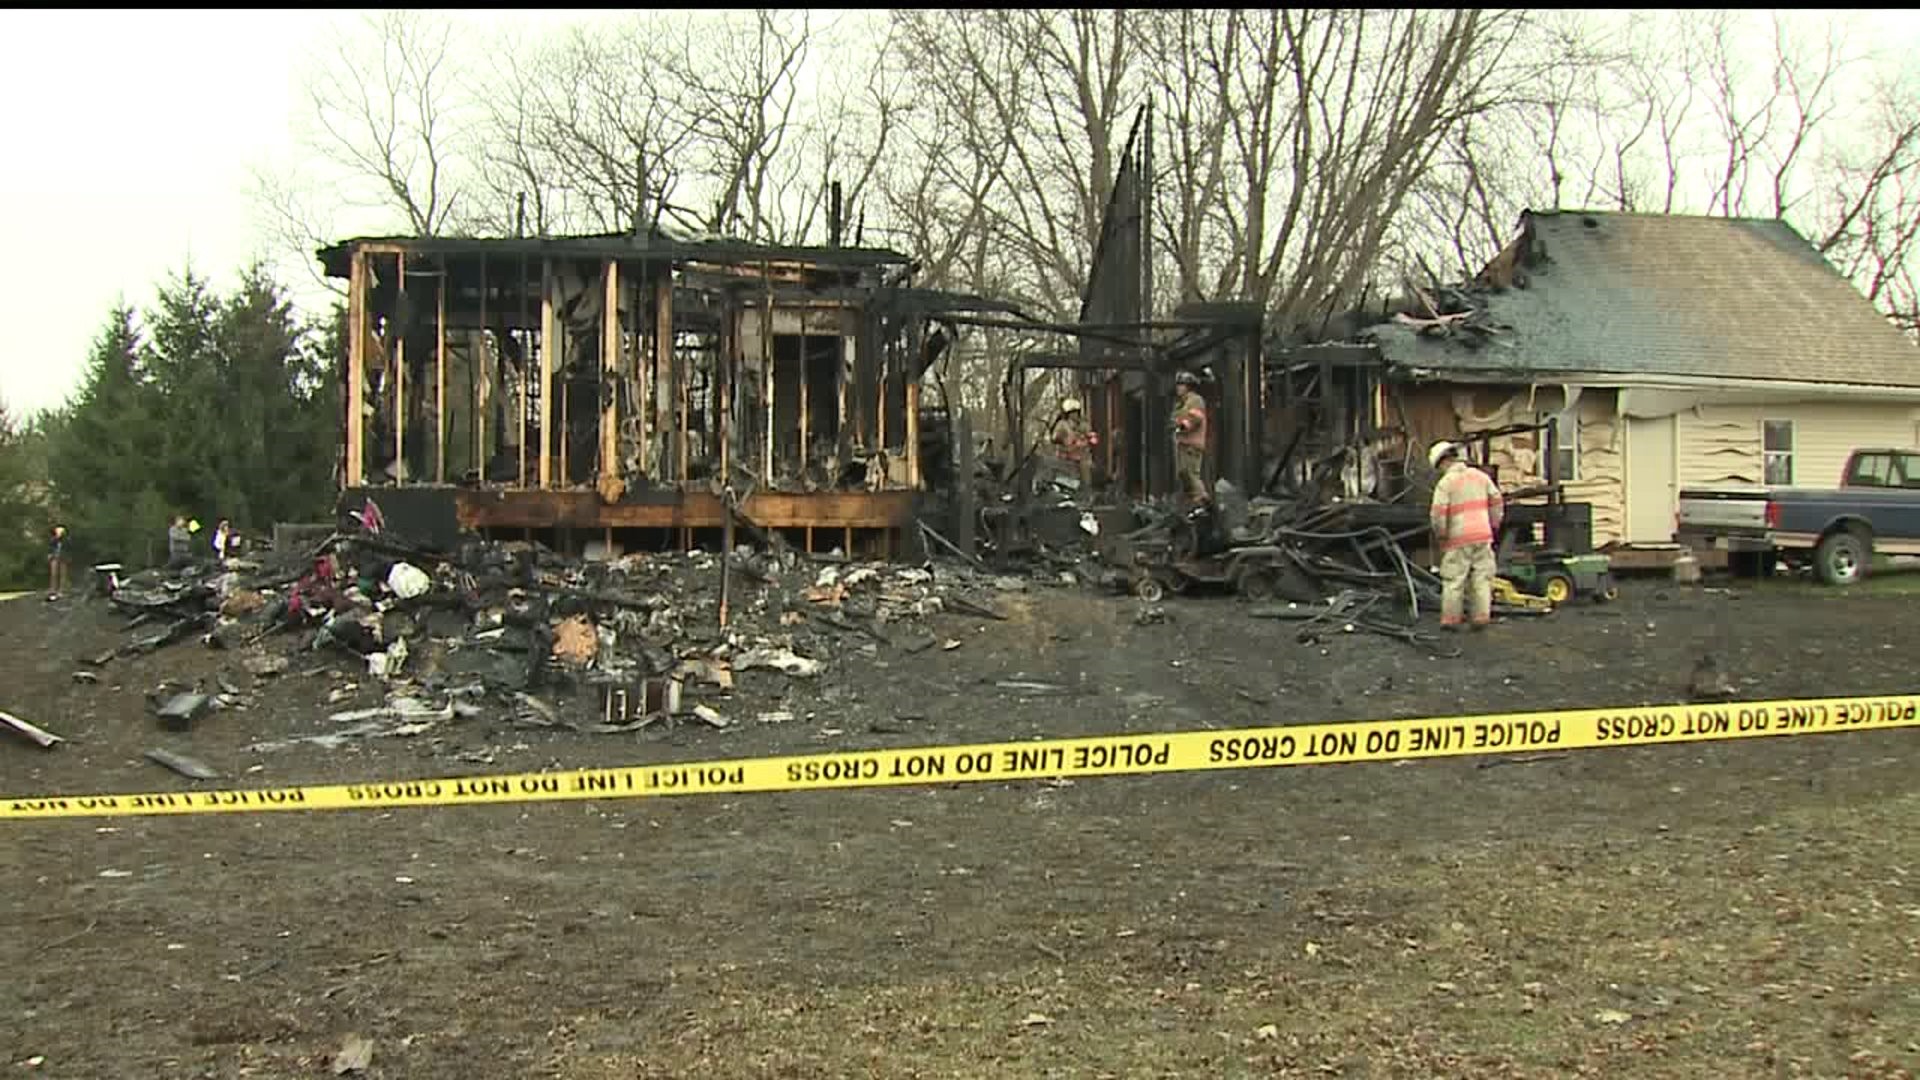 6 People Die in House Fire in Lost Nation, Illinois